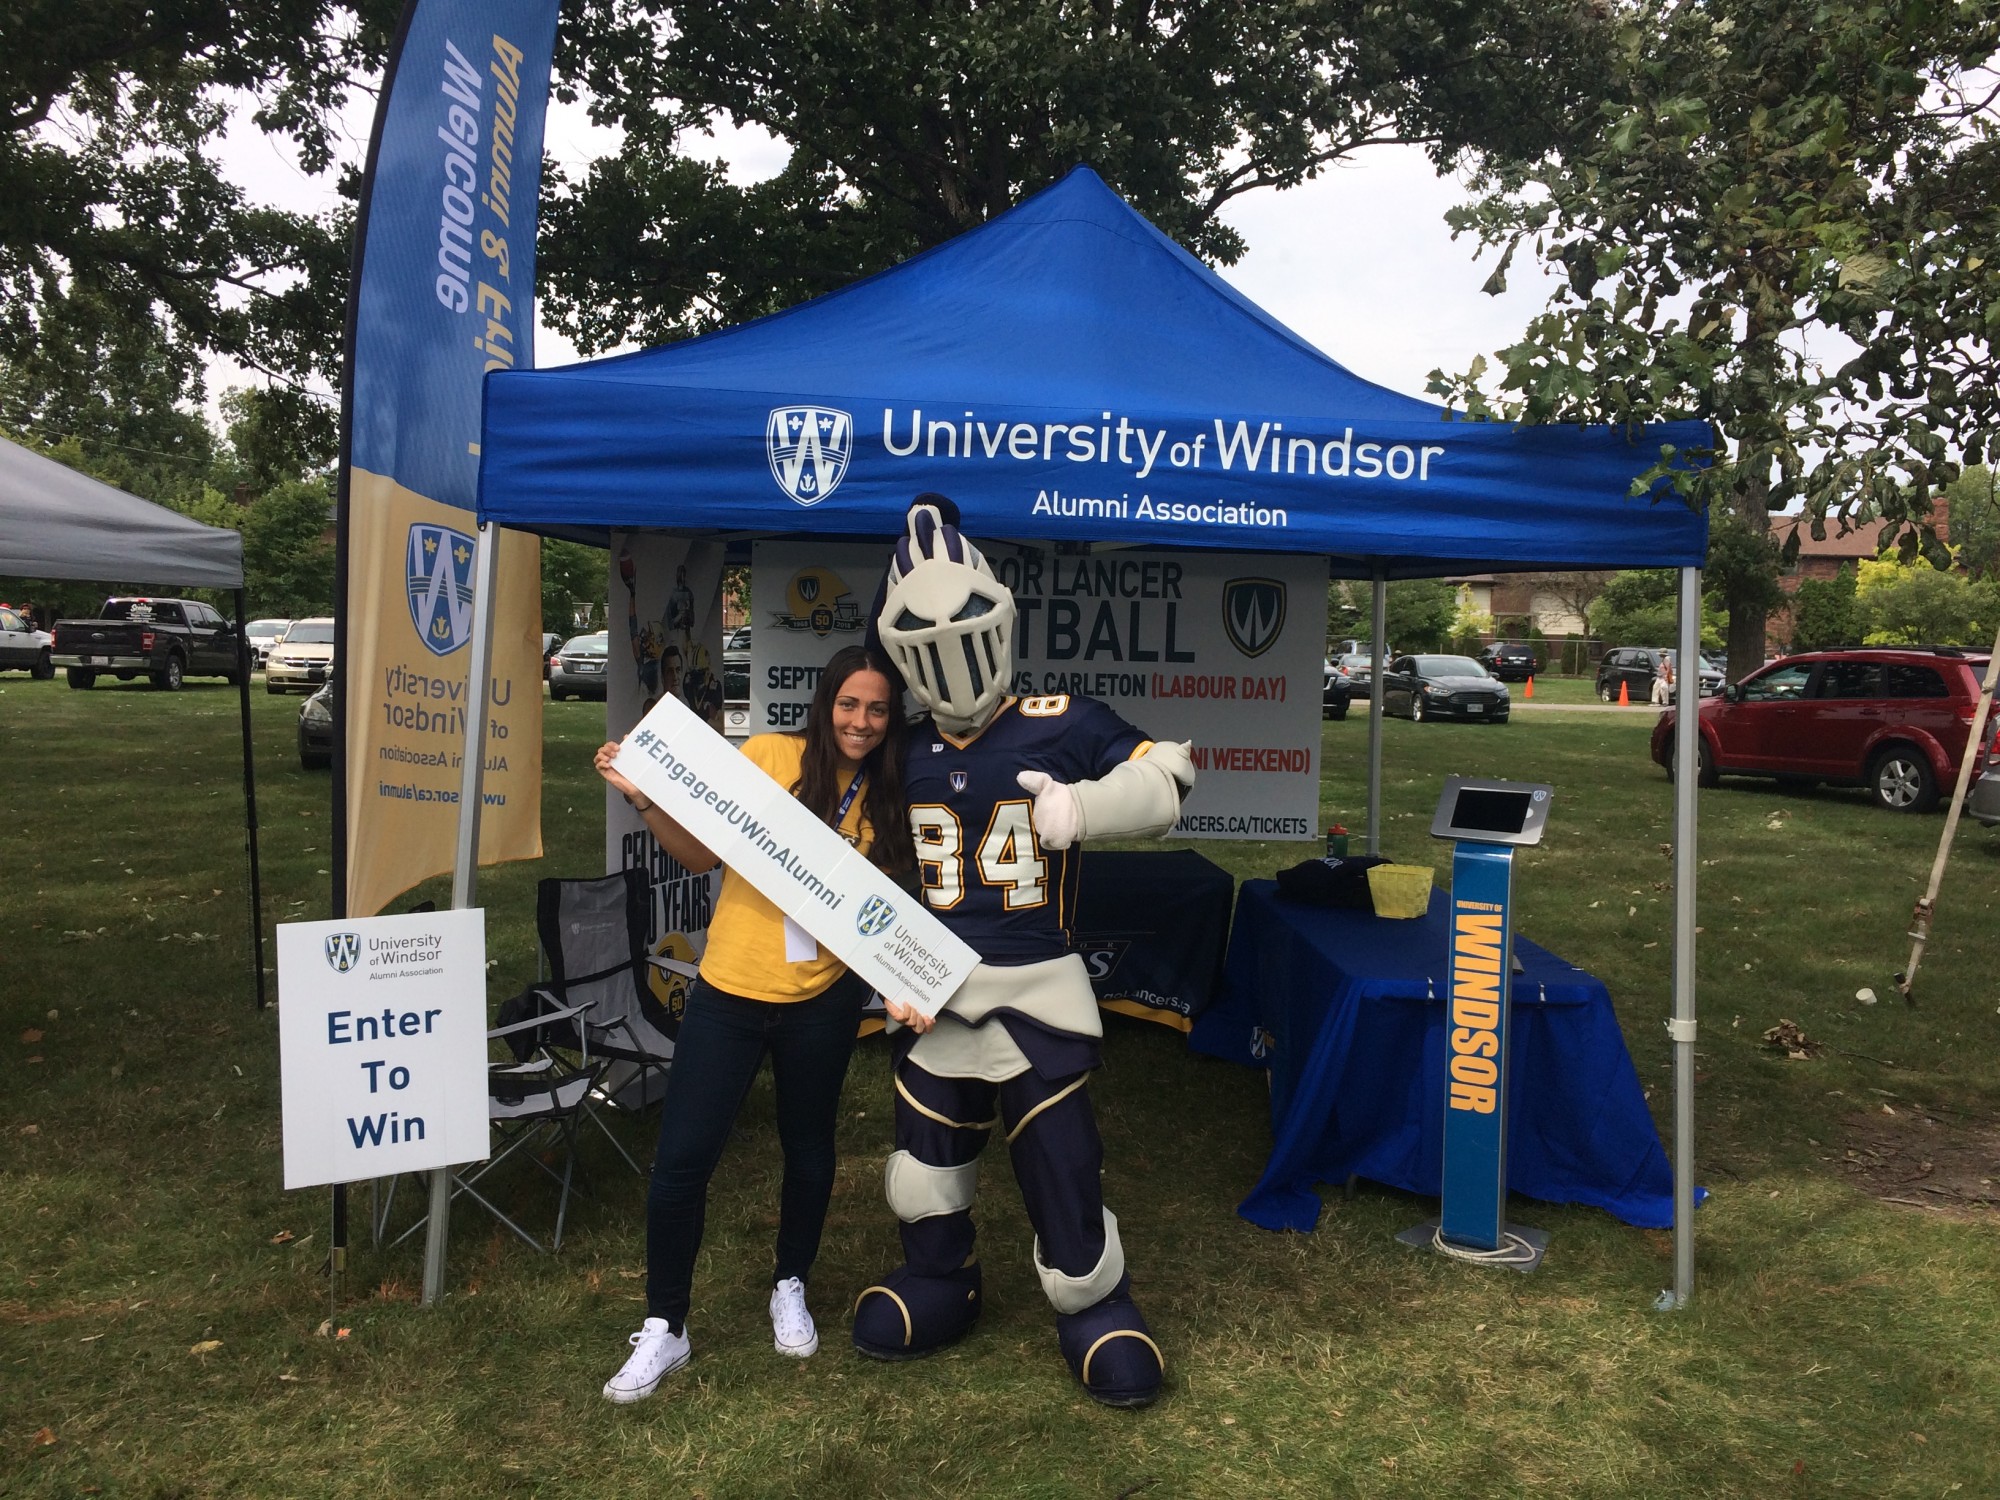 Volunteer takes a photo with the Lancers mascot, Winston, at a community event.